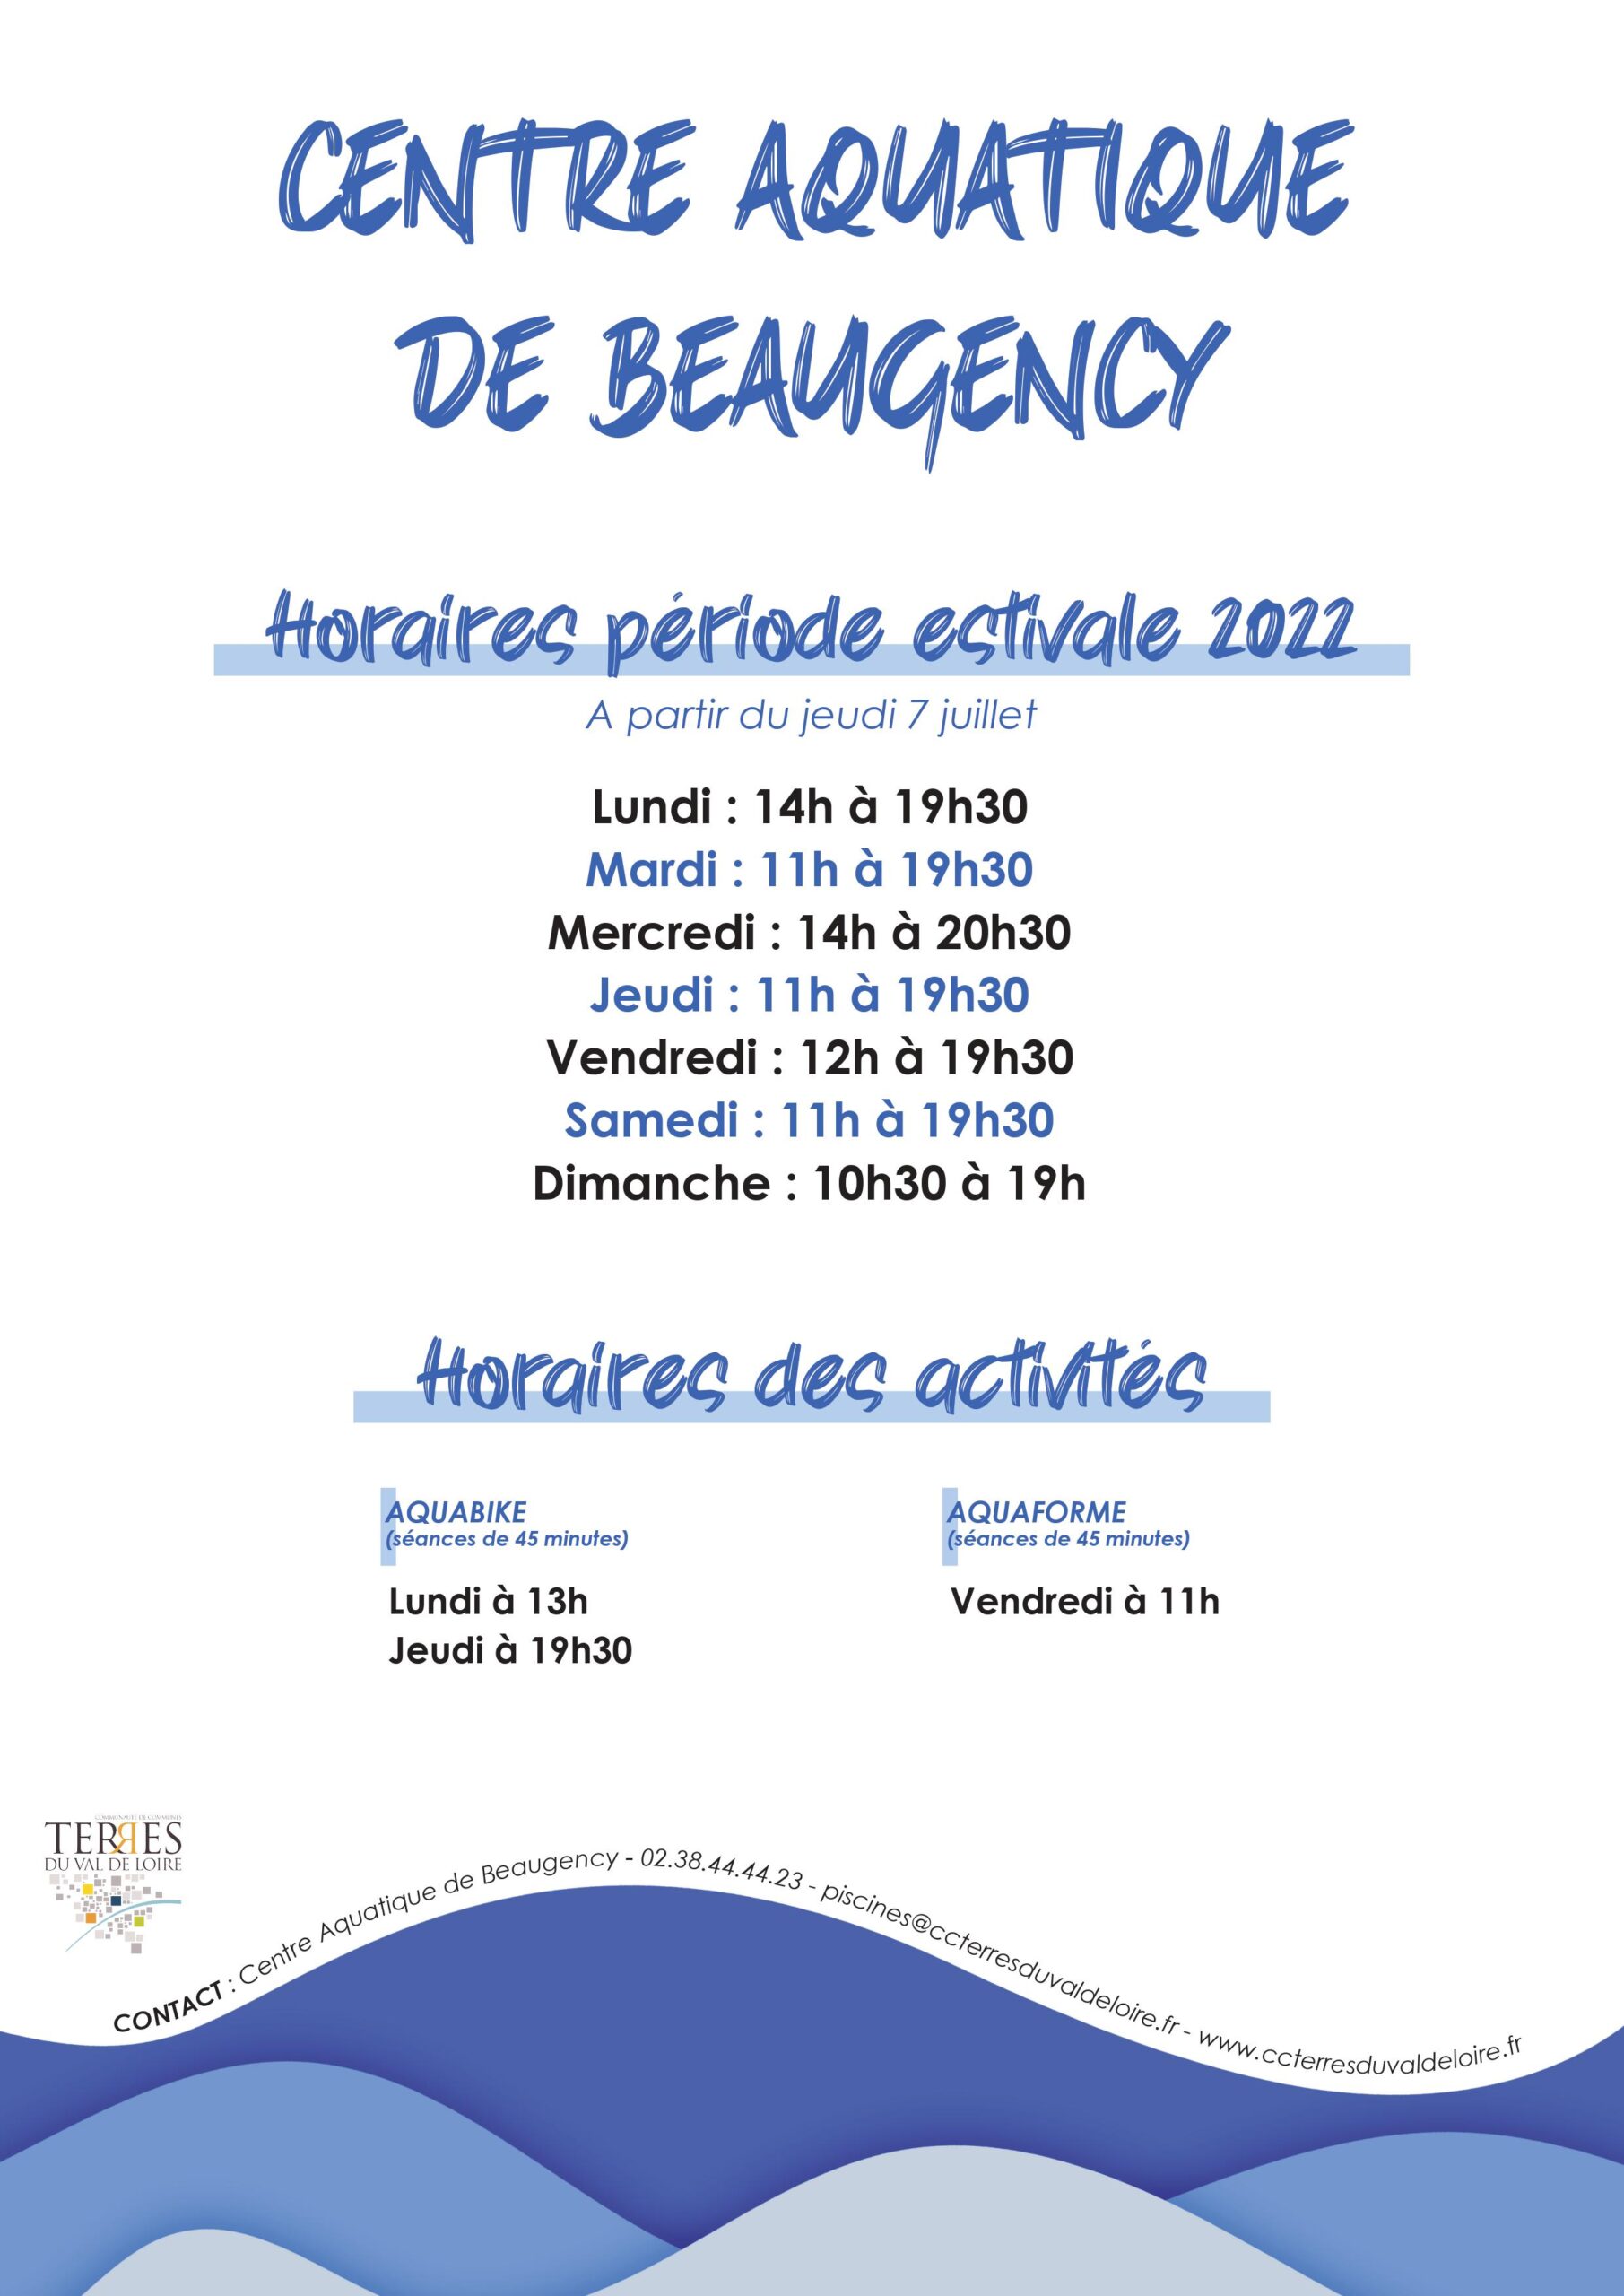 Affiche Horaires Activites Beaugency Periode estivale 2022 scaled